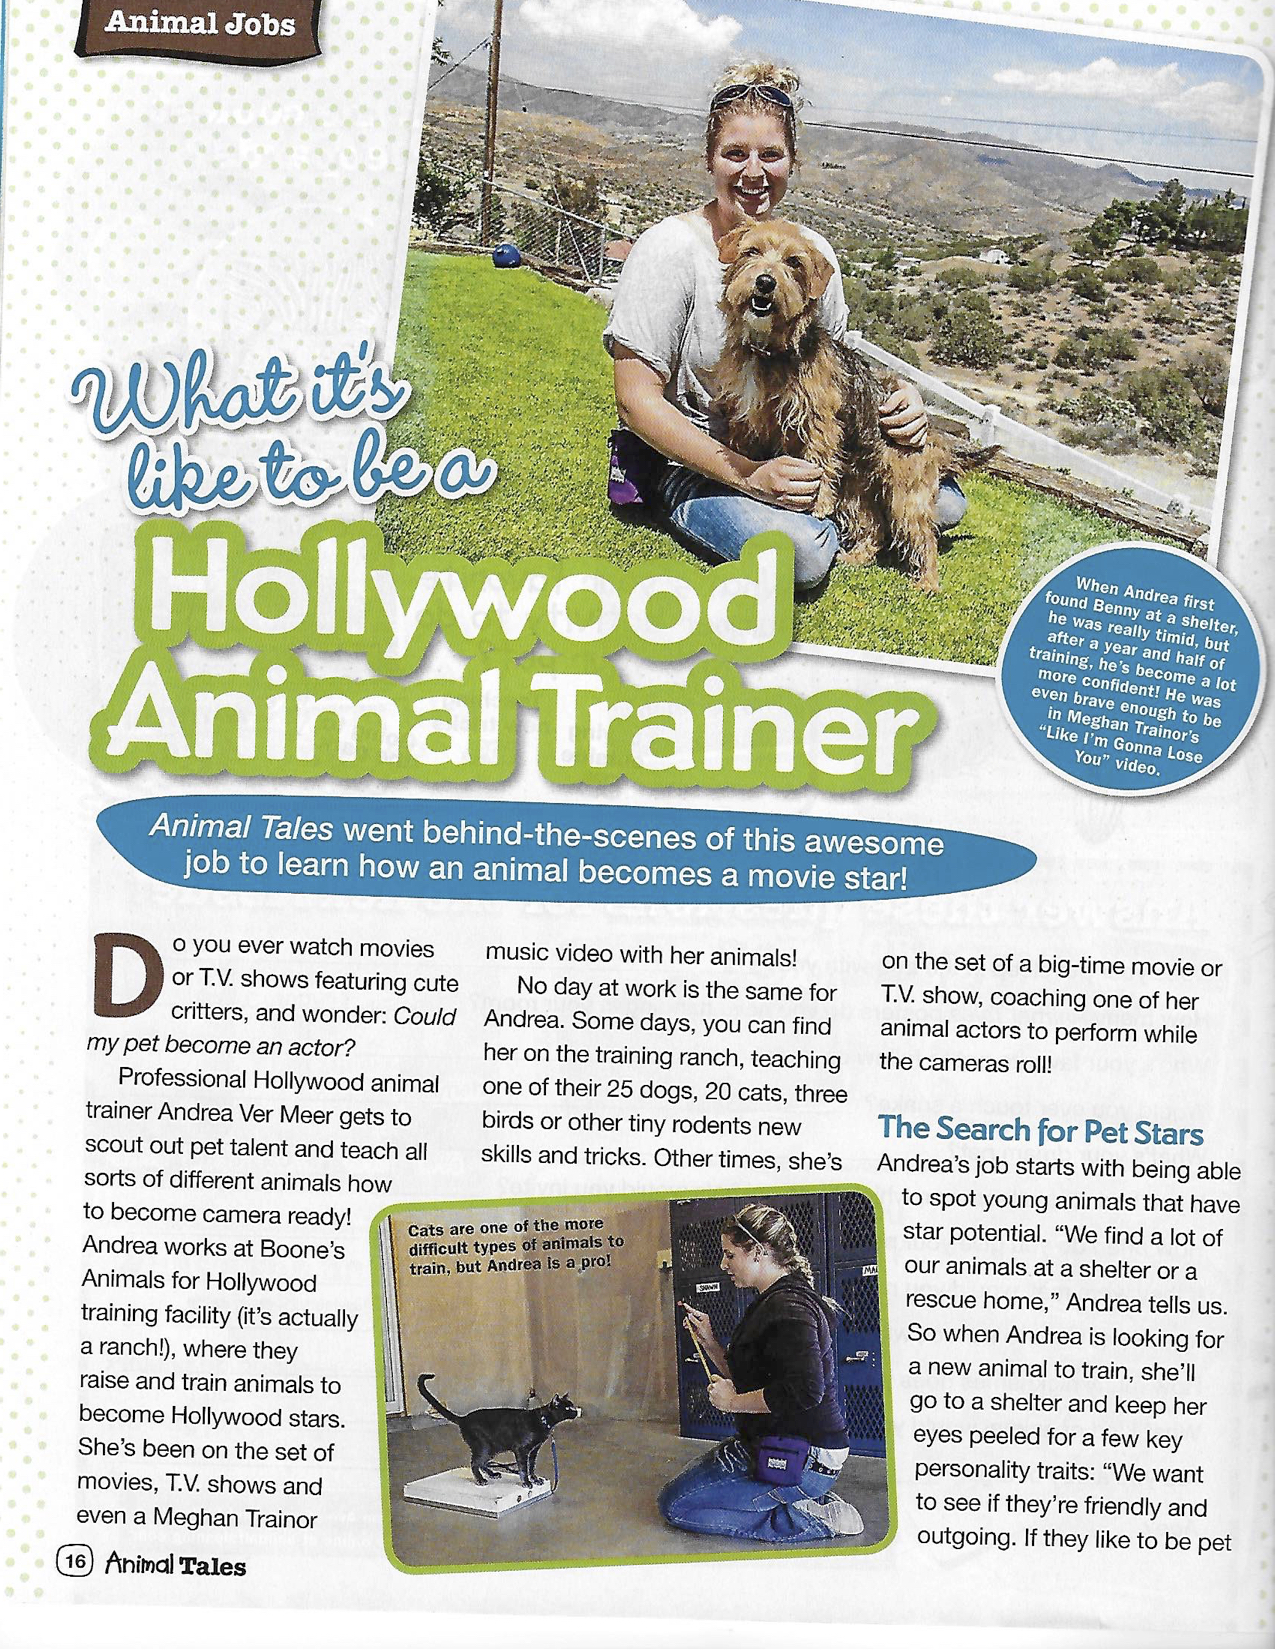 Animal Tales-Andrea Ver Meer Interview - Animals For Hollywood